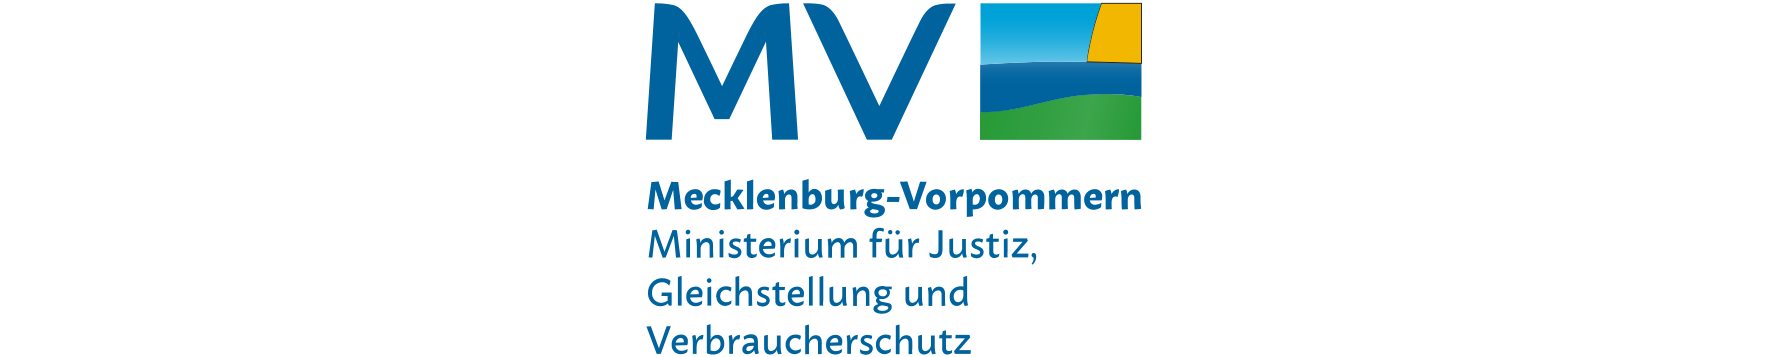 Mecklenburg-Western Pomerania Ministry of Justice, Equality and Consumer Protection